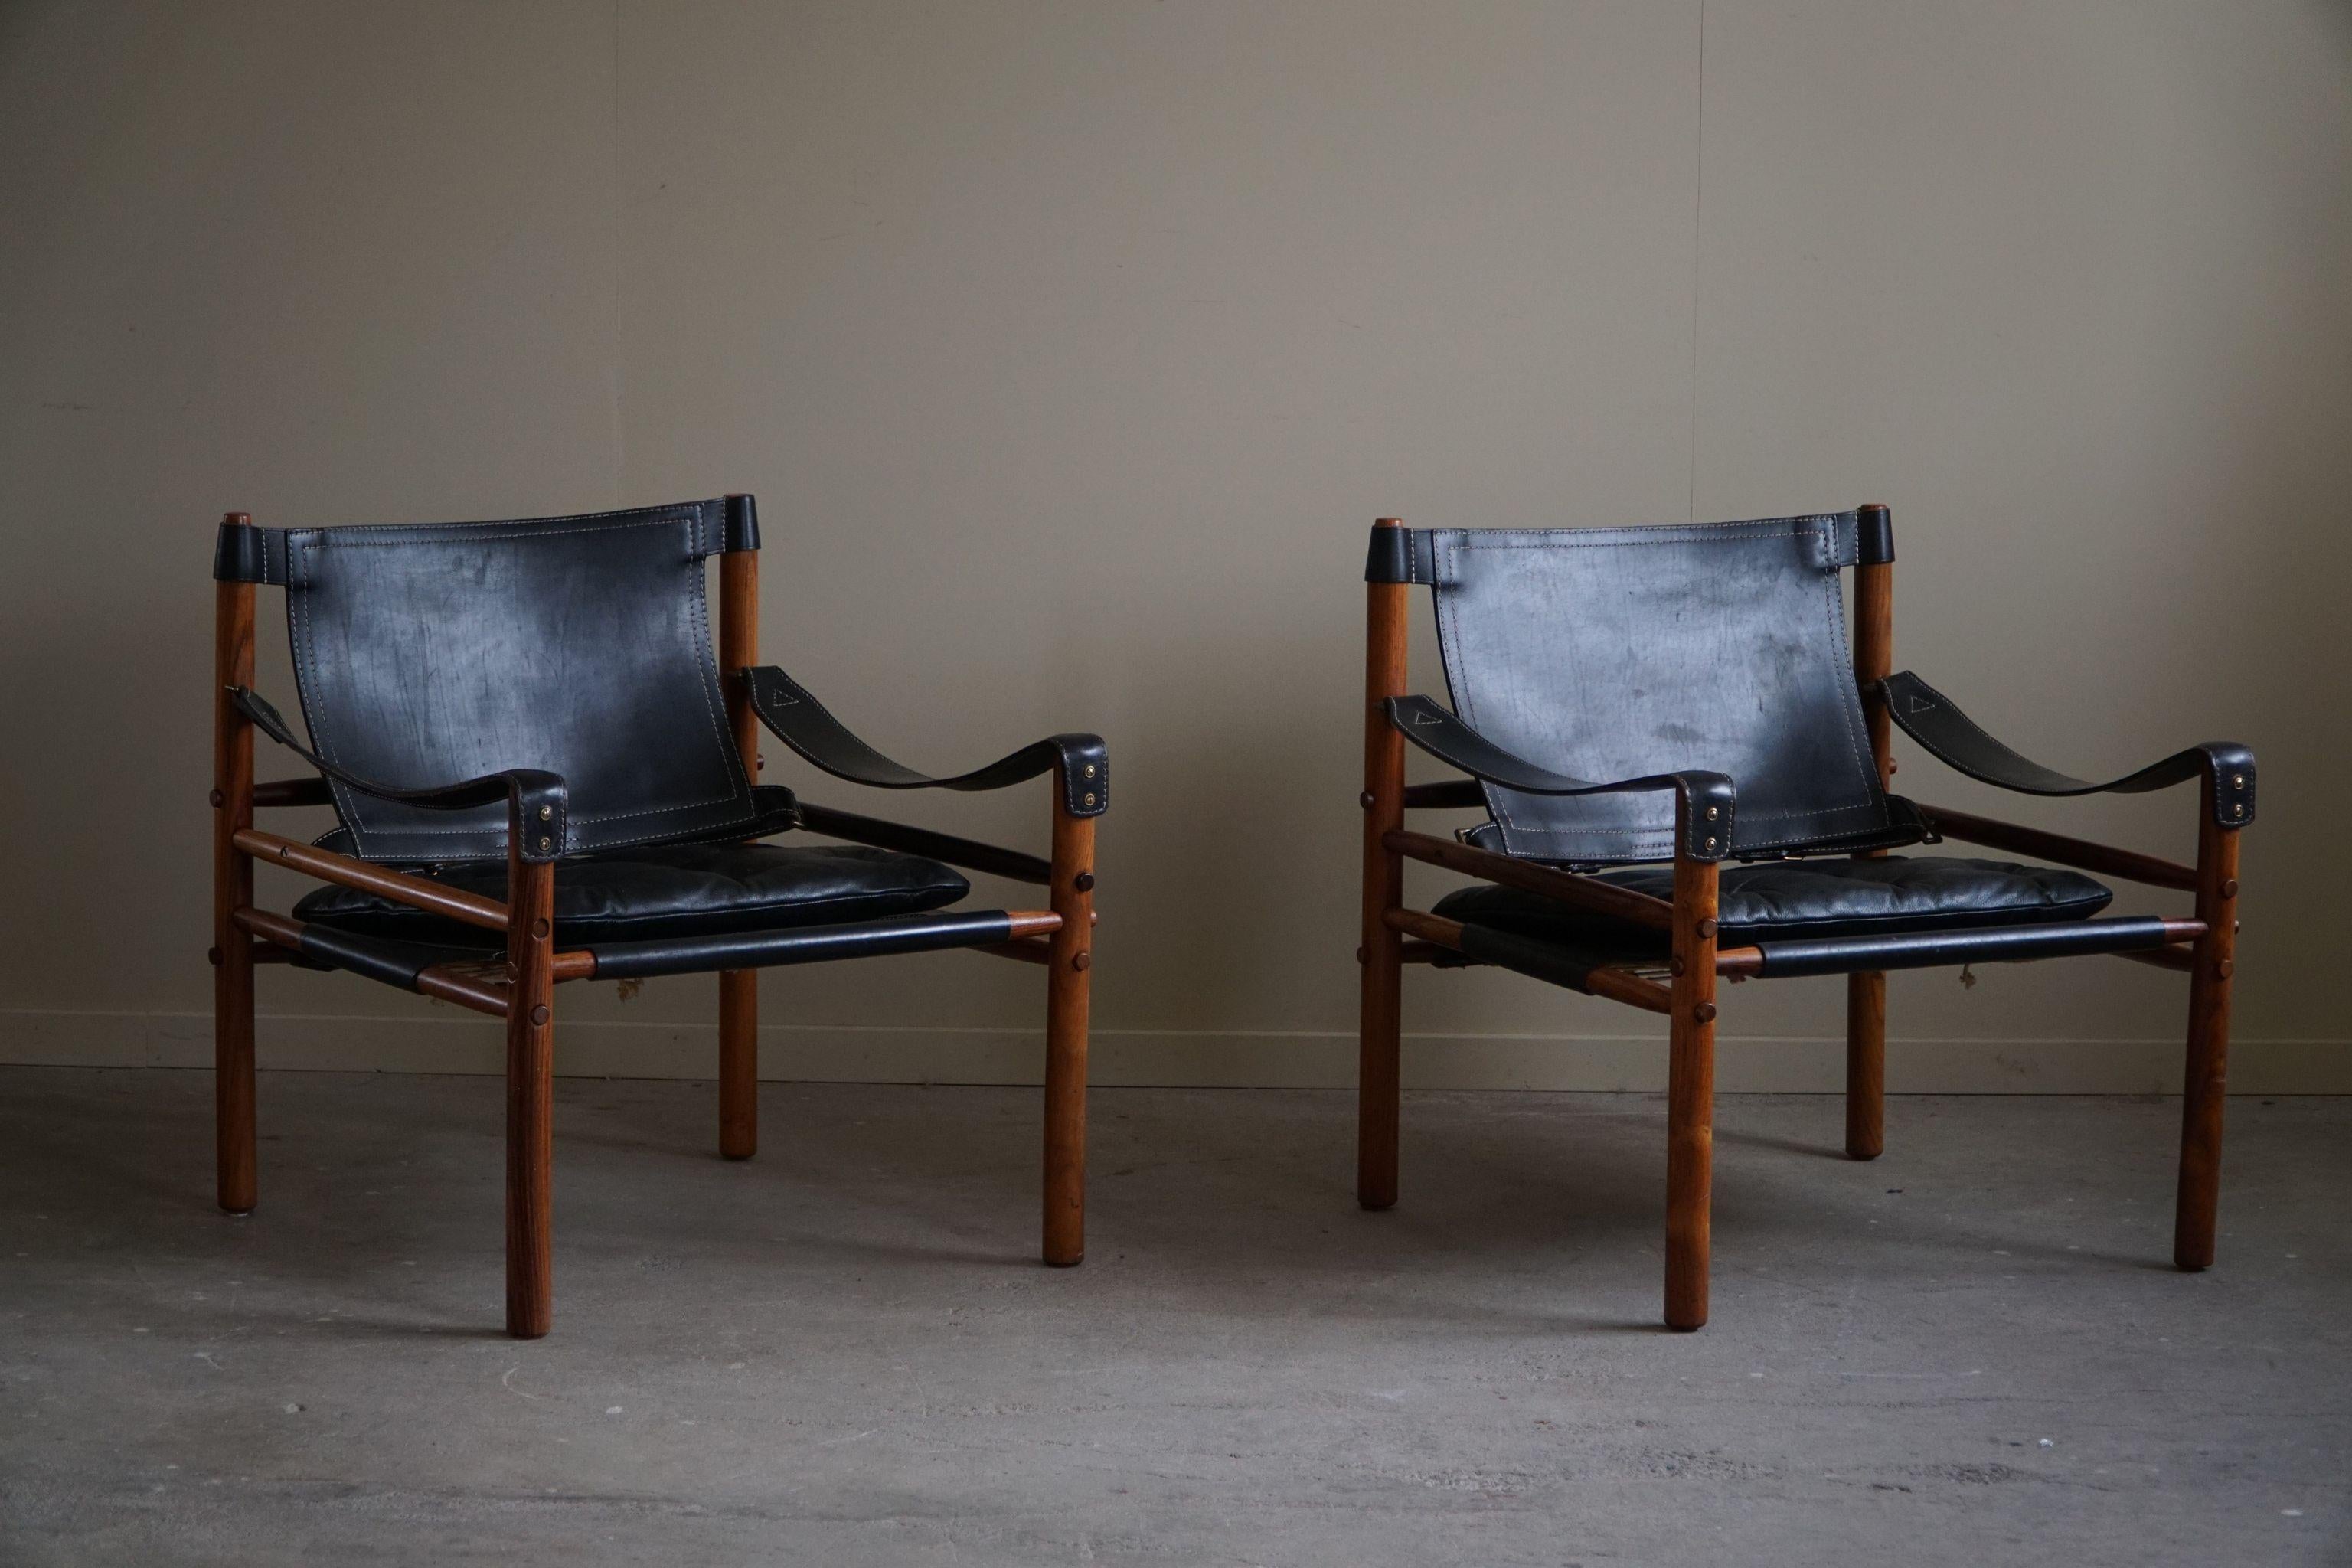 20th Century Pair of Sirocco Lounge Chairs in Rosewood, Arne Norell, Ab Aneby, 1960s For Sale